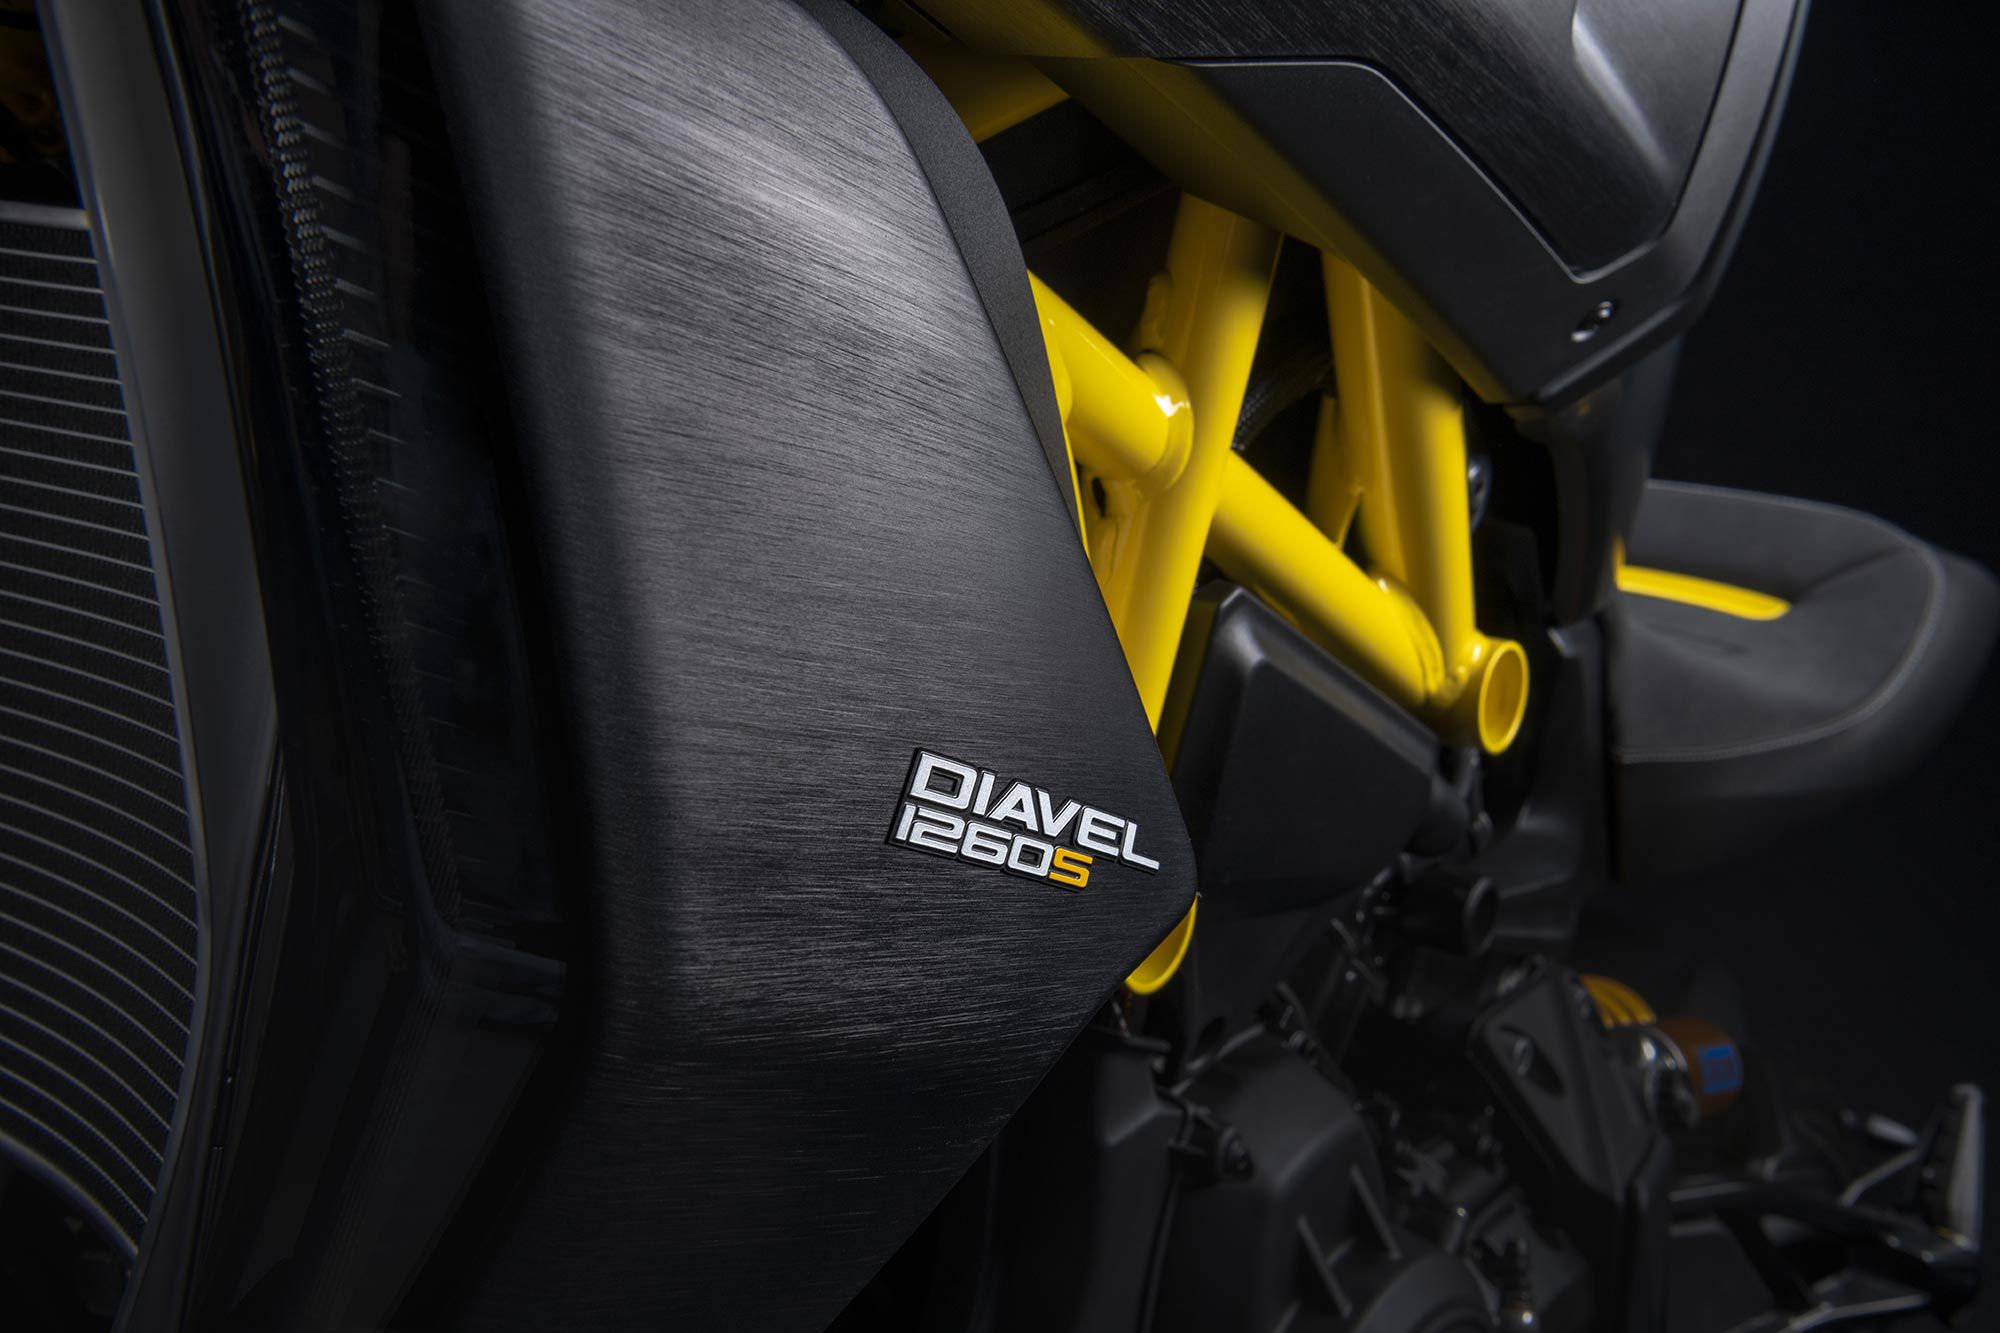 Ducati also makes use of different textures to enhance the look of the new Diavel.